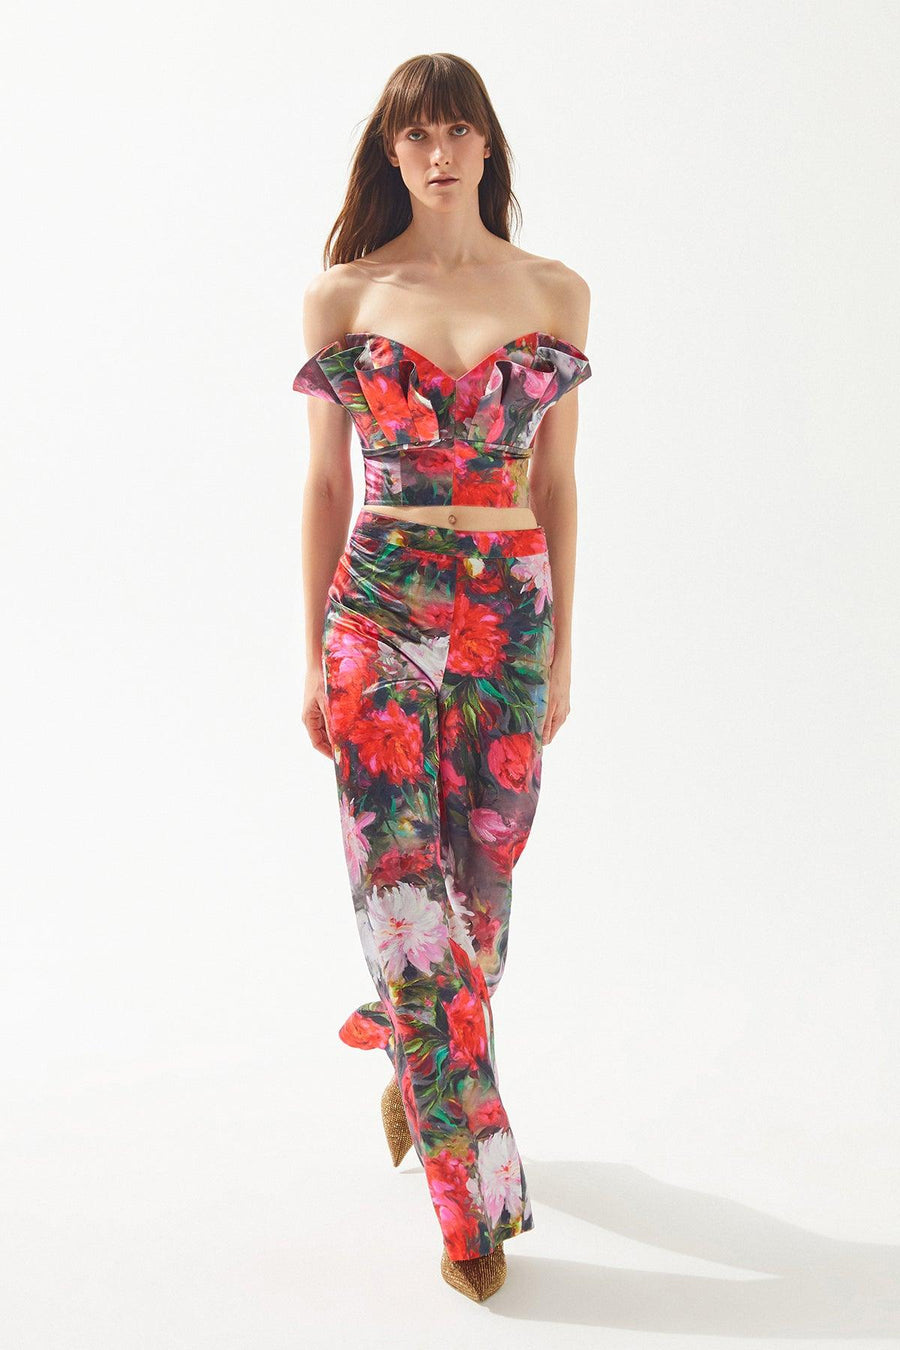 Multicolored Red Rose Patterned Strapless Ruffled Crop